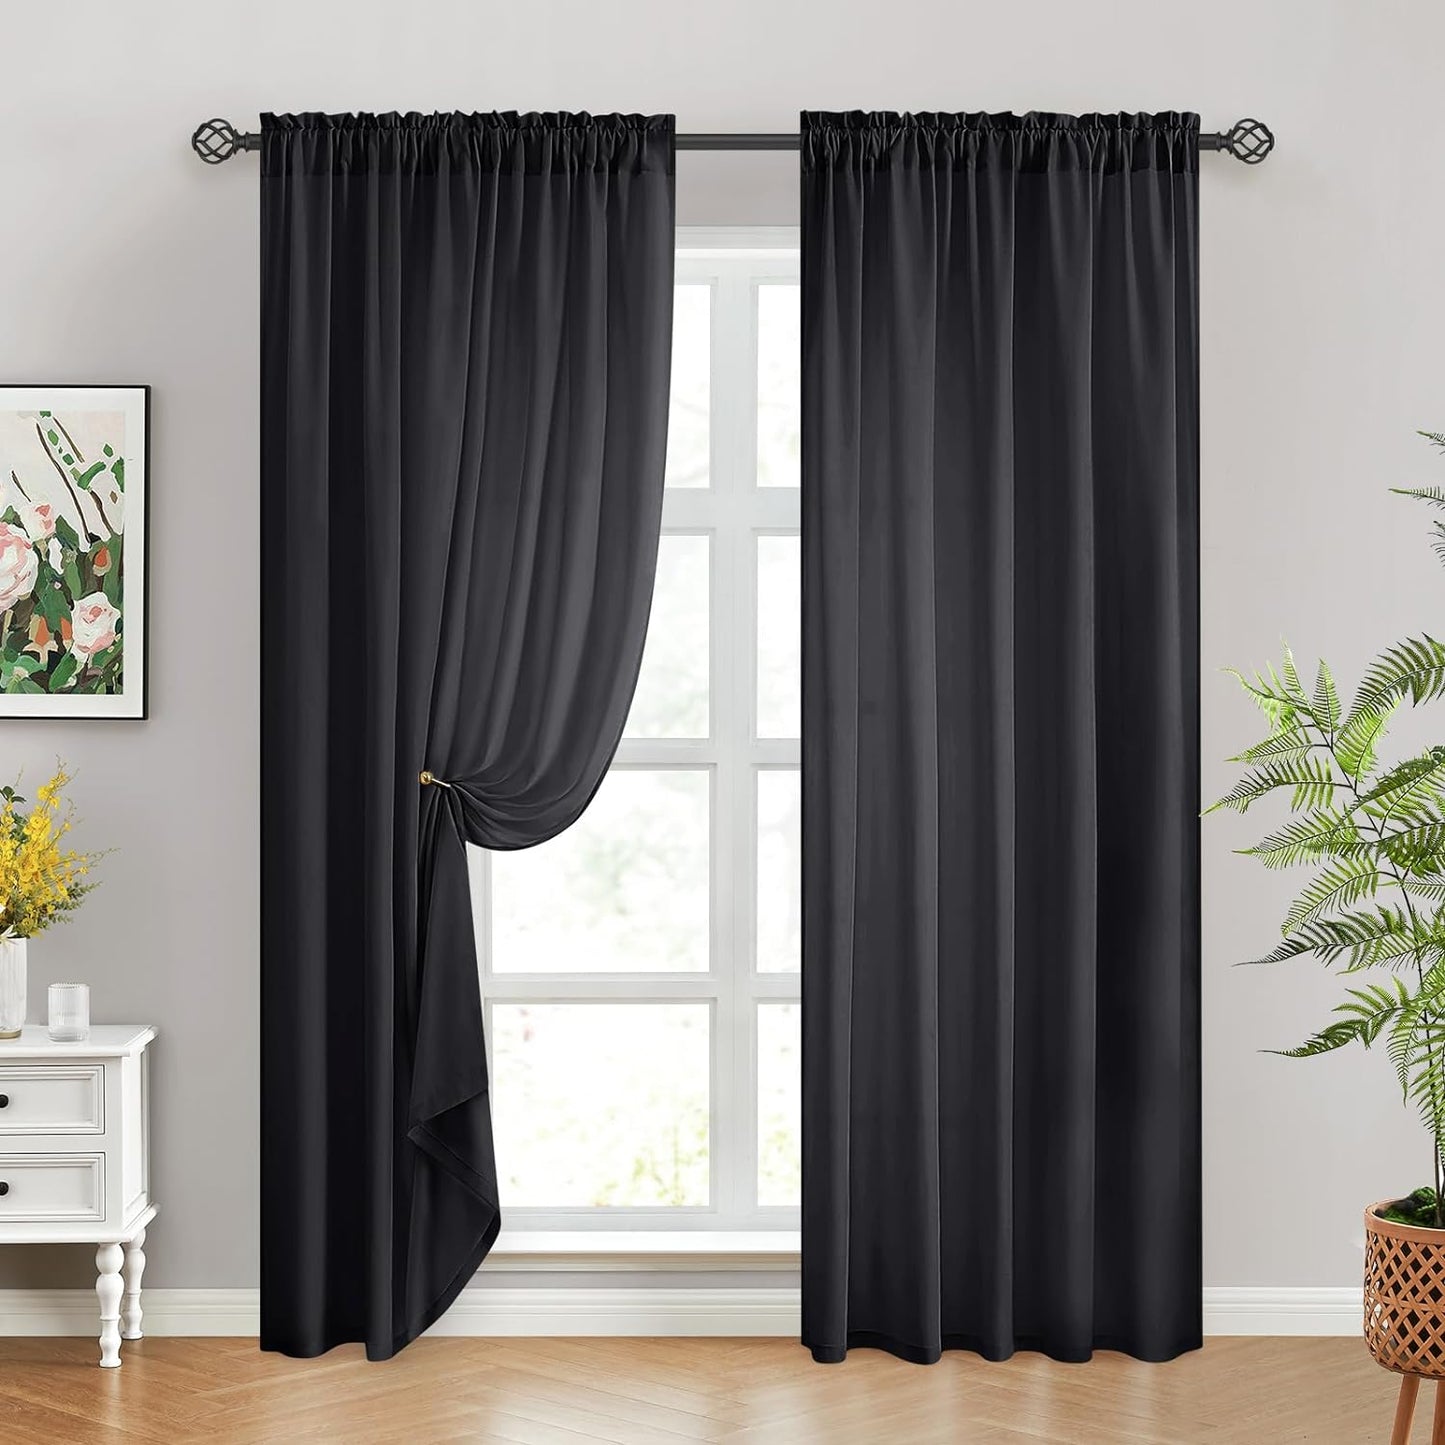 HOMEIDEAS Non-See-Through White Privacy Sheer Curtains 52 X 84 Inches Long 2 Panels Semi Sheer Curtains Light Filtering Window Curtains Drapes for Bedroom Living Room  HOMEIDEAS Black W52" X L96" 